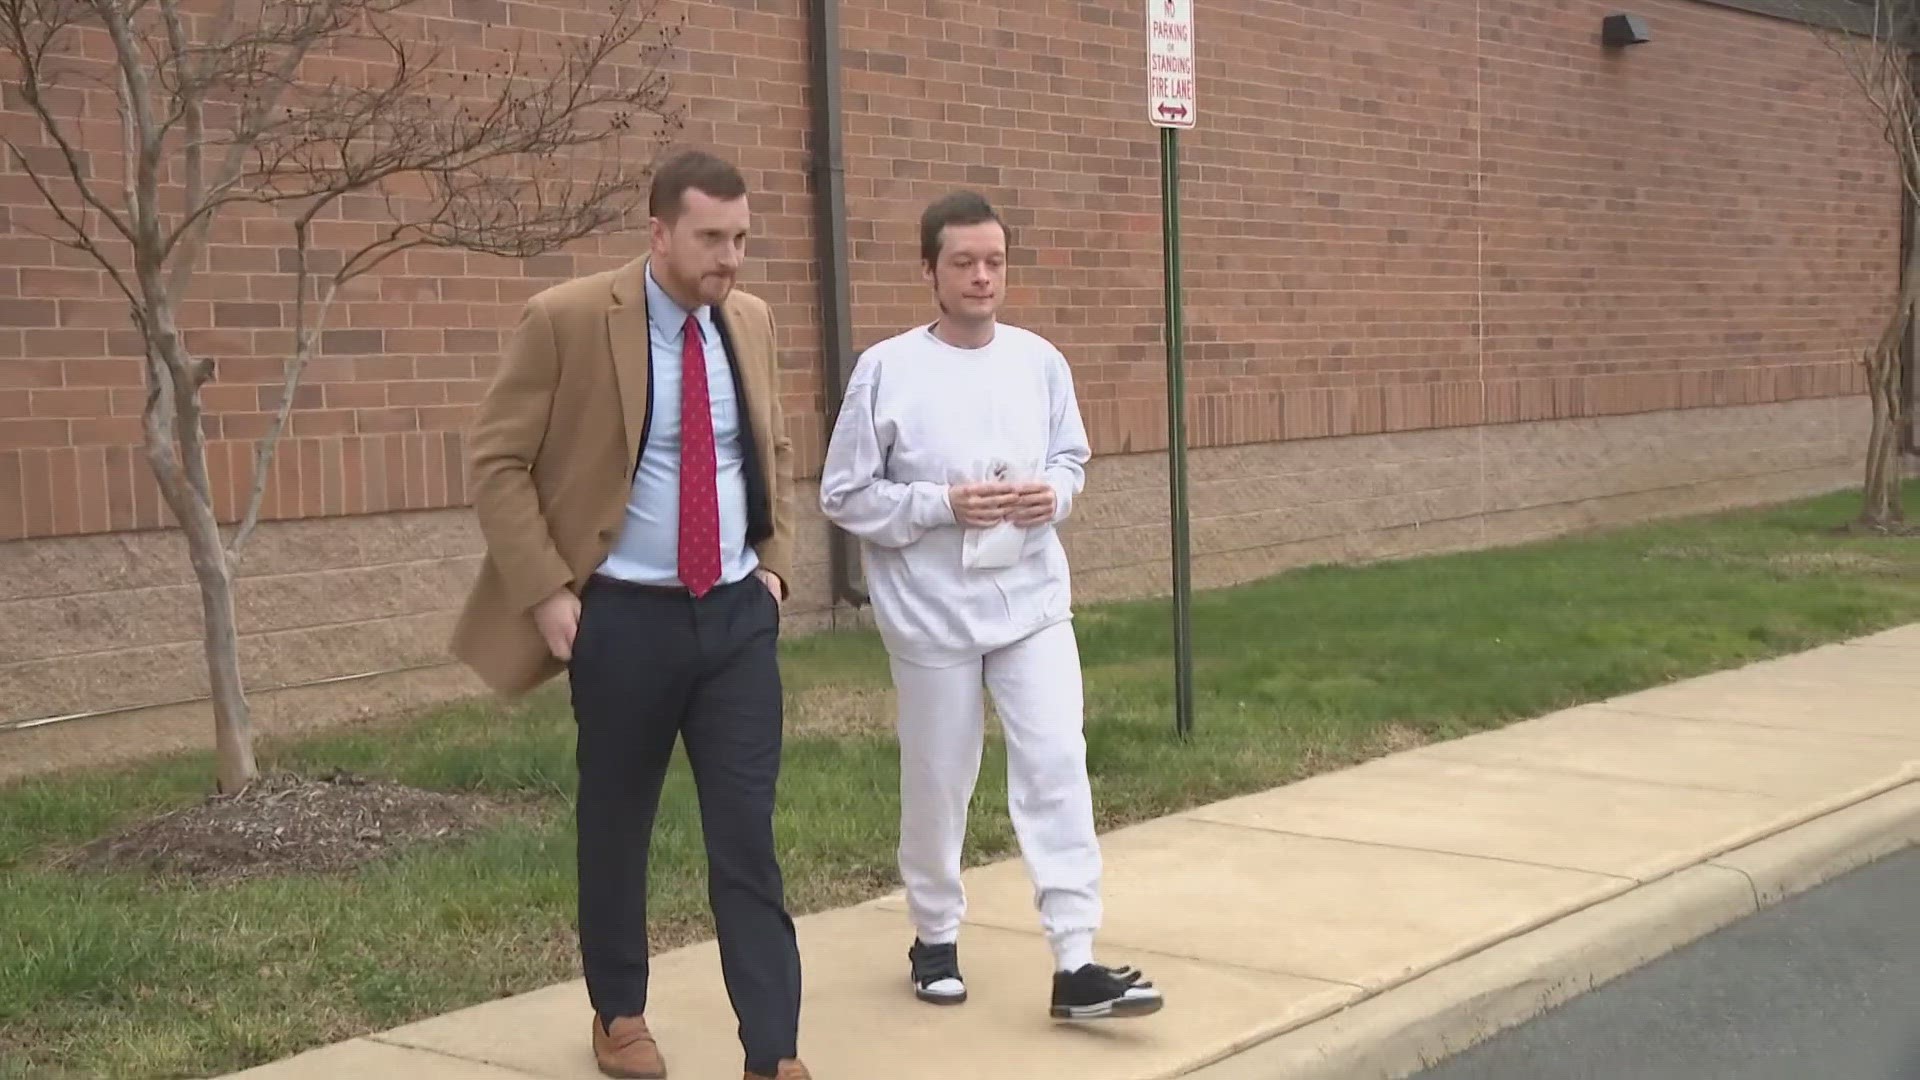 Following eight months in jail for shooting a YouTube prankster, Alan Colie, 31, is able to walk out of jail after a judge sentenced him to time already served.